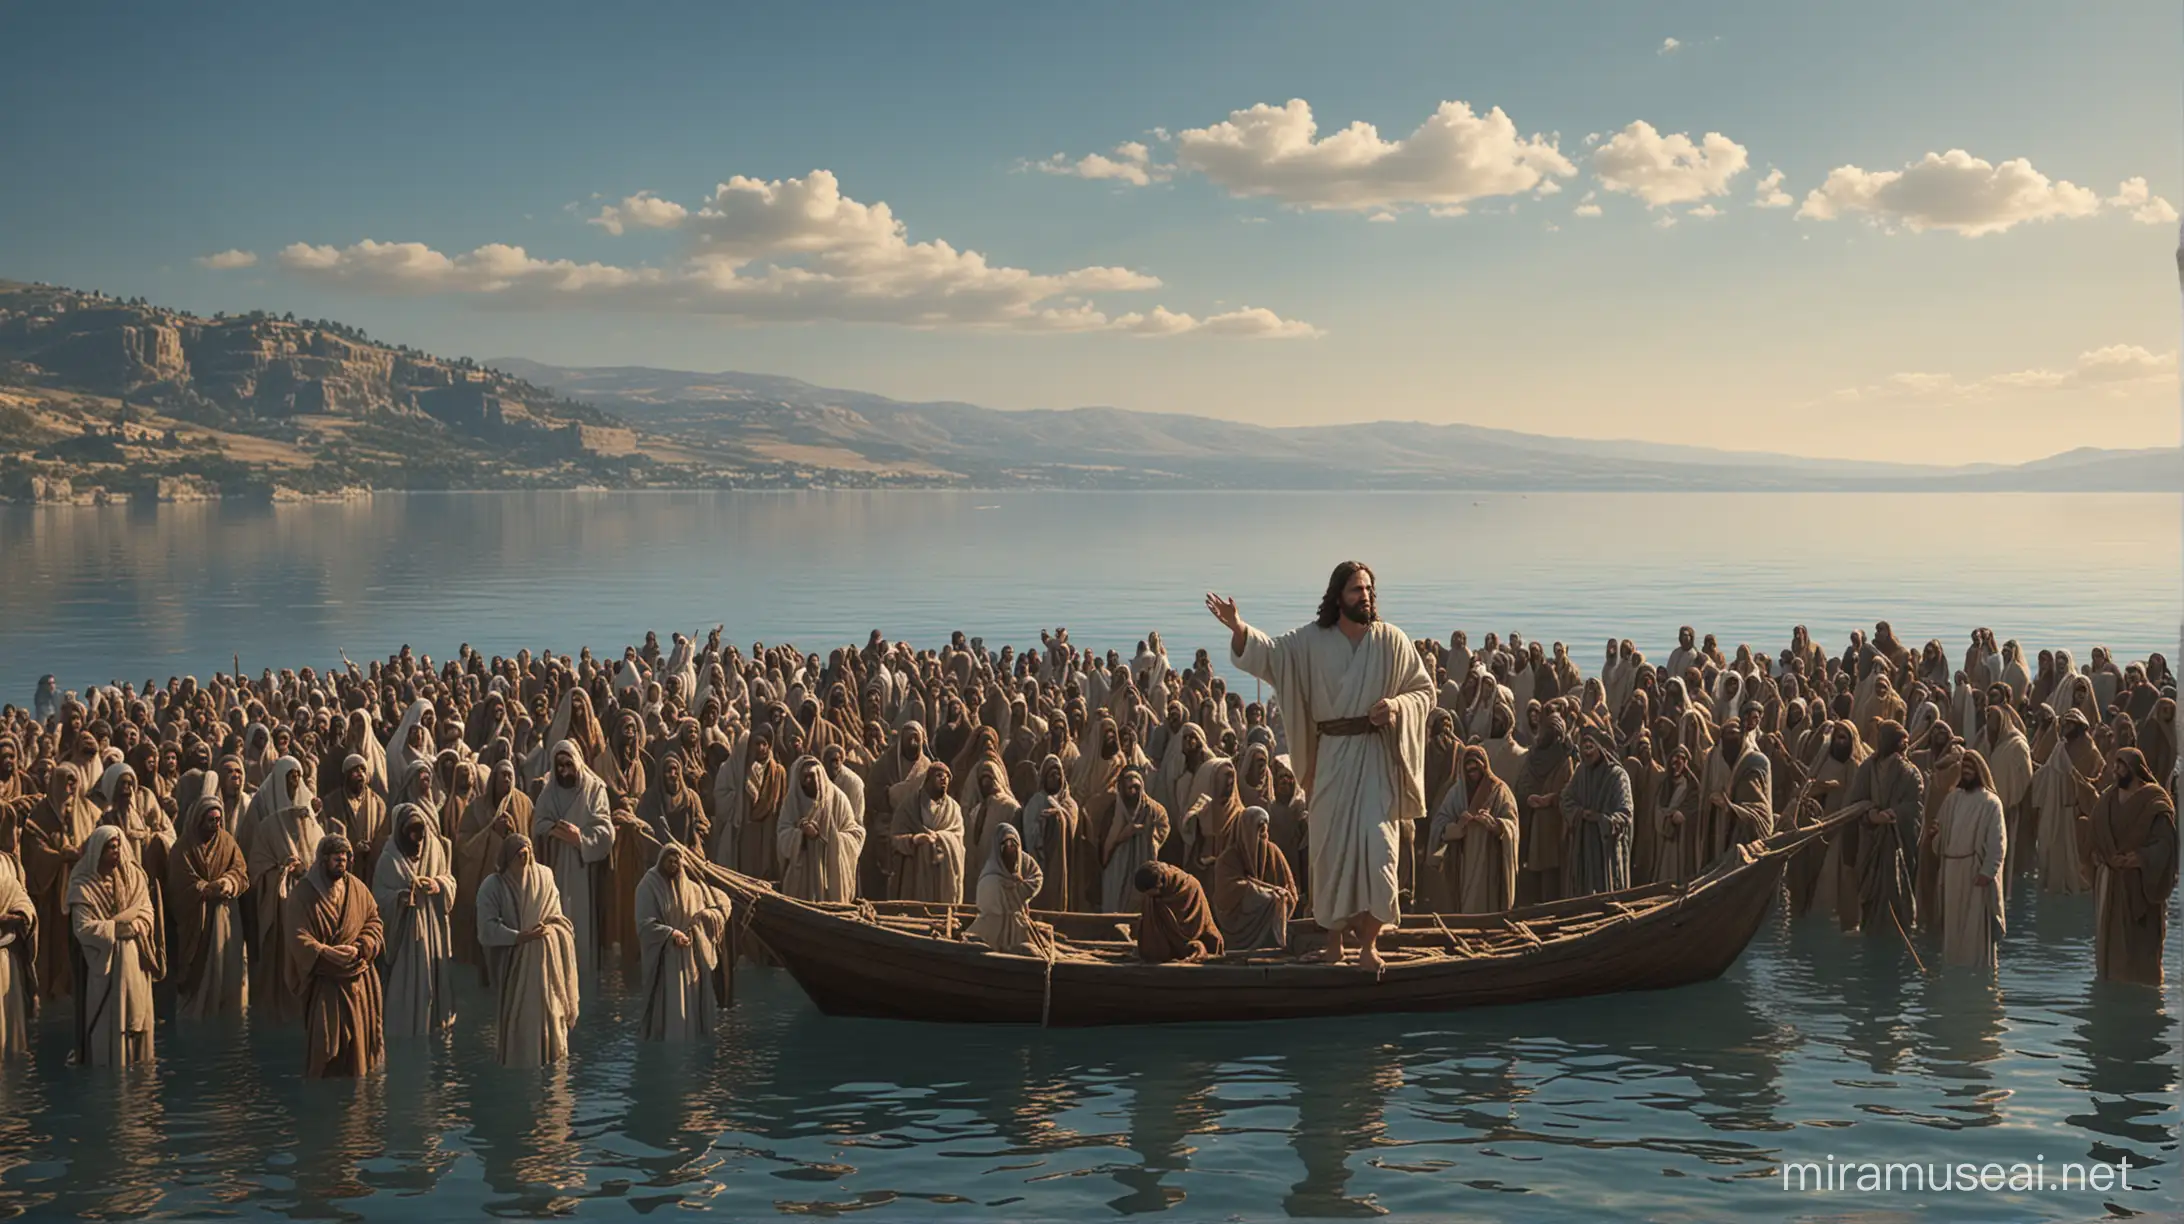 1st century image of Jesus on the Sea of Galilee, gathered with his followers on a warm afternoon with a serene blue sky. 6k resolution, more realistic, based on the movie The Passion of the Christ.